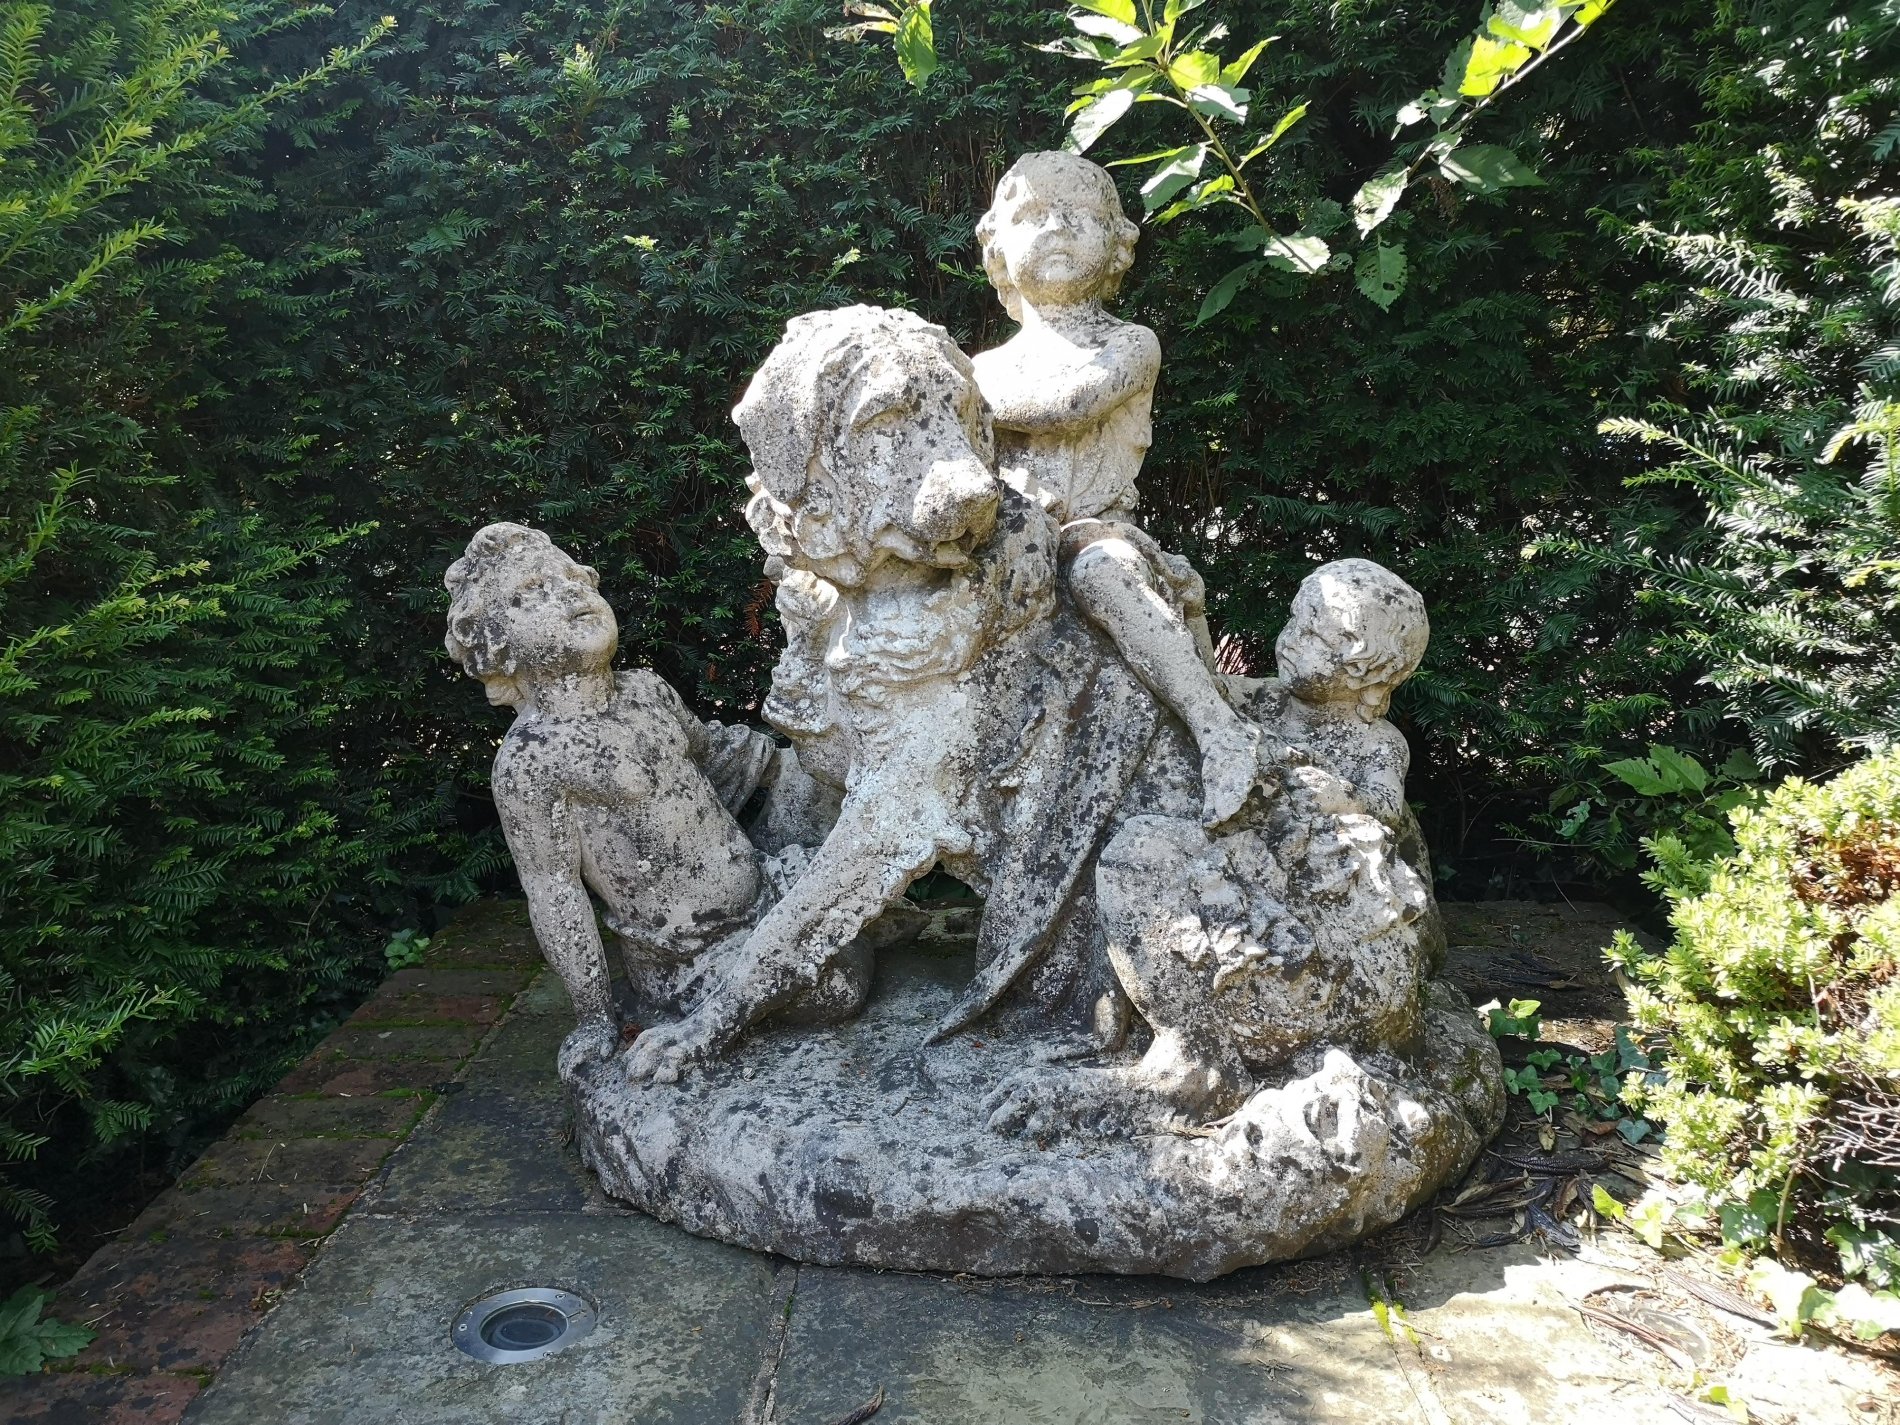 A composition stone group of a dog and children